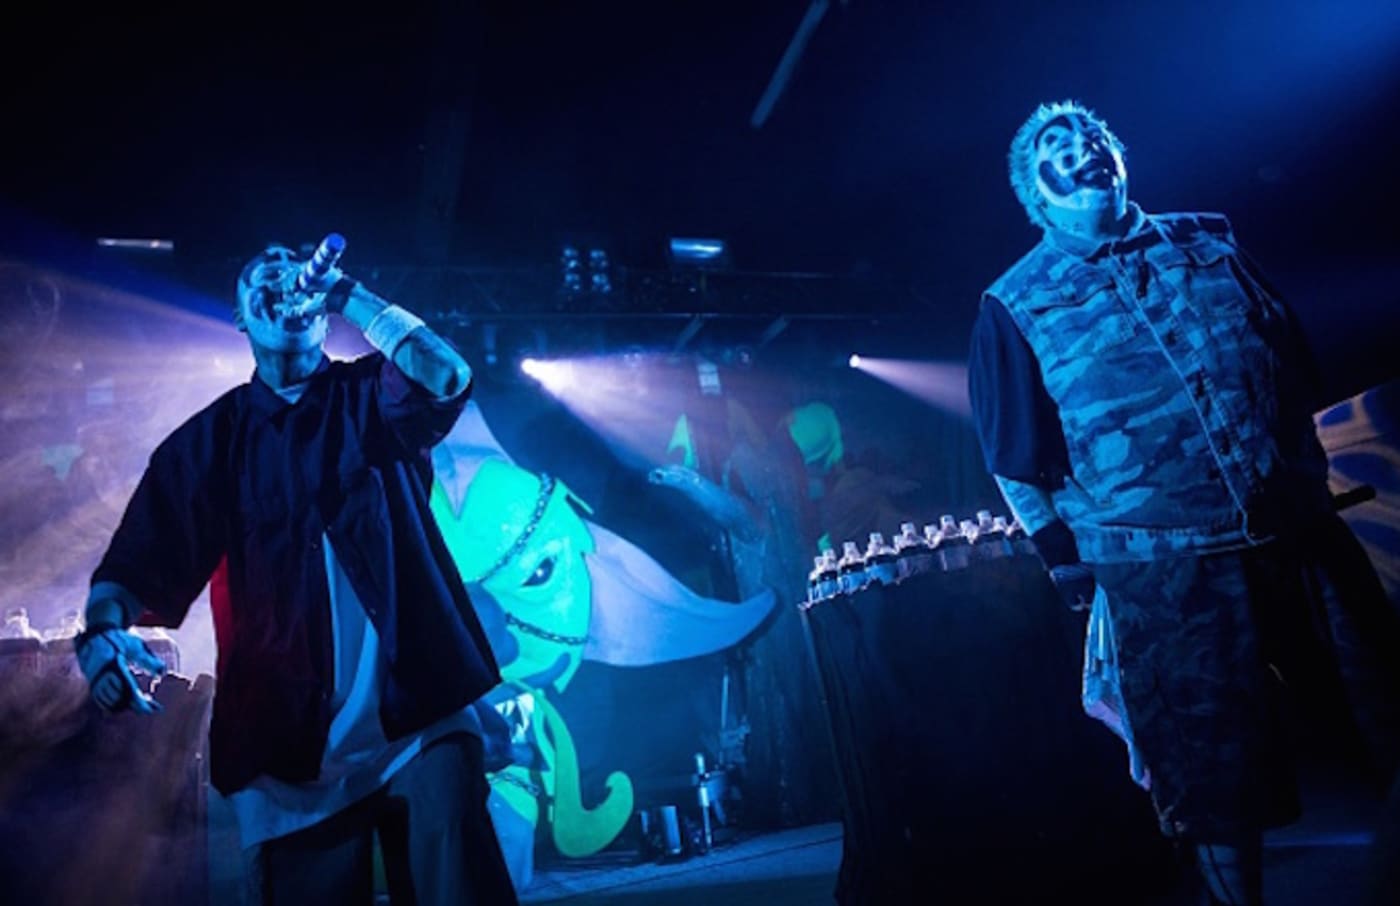 Insane Clown Posse performs in concert at The Pressroom